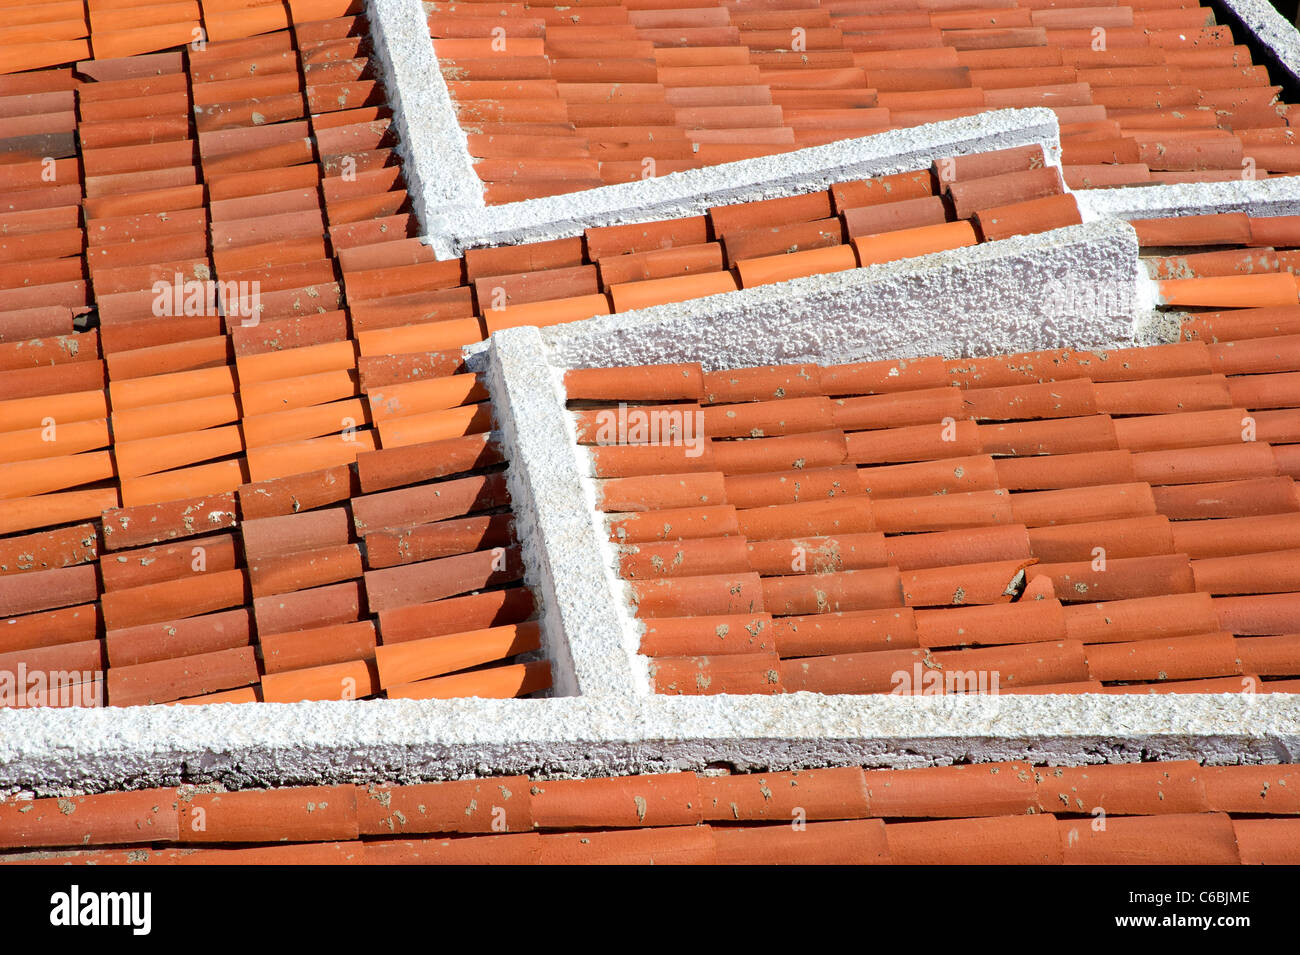 Tiled roof of a house in Maspalomas on Gran Canaria, Spain Stock Photo